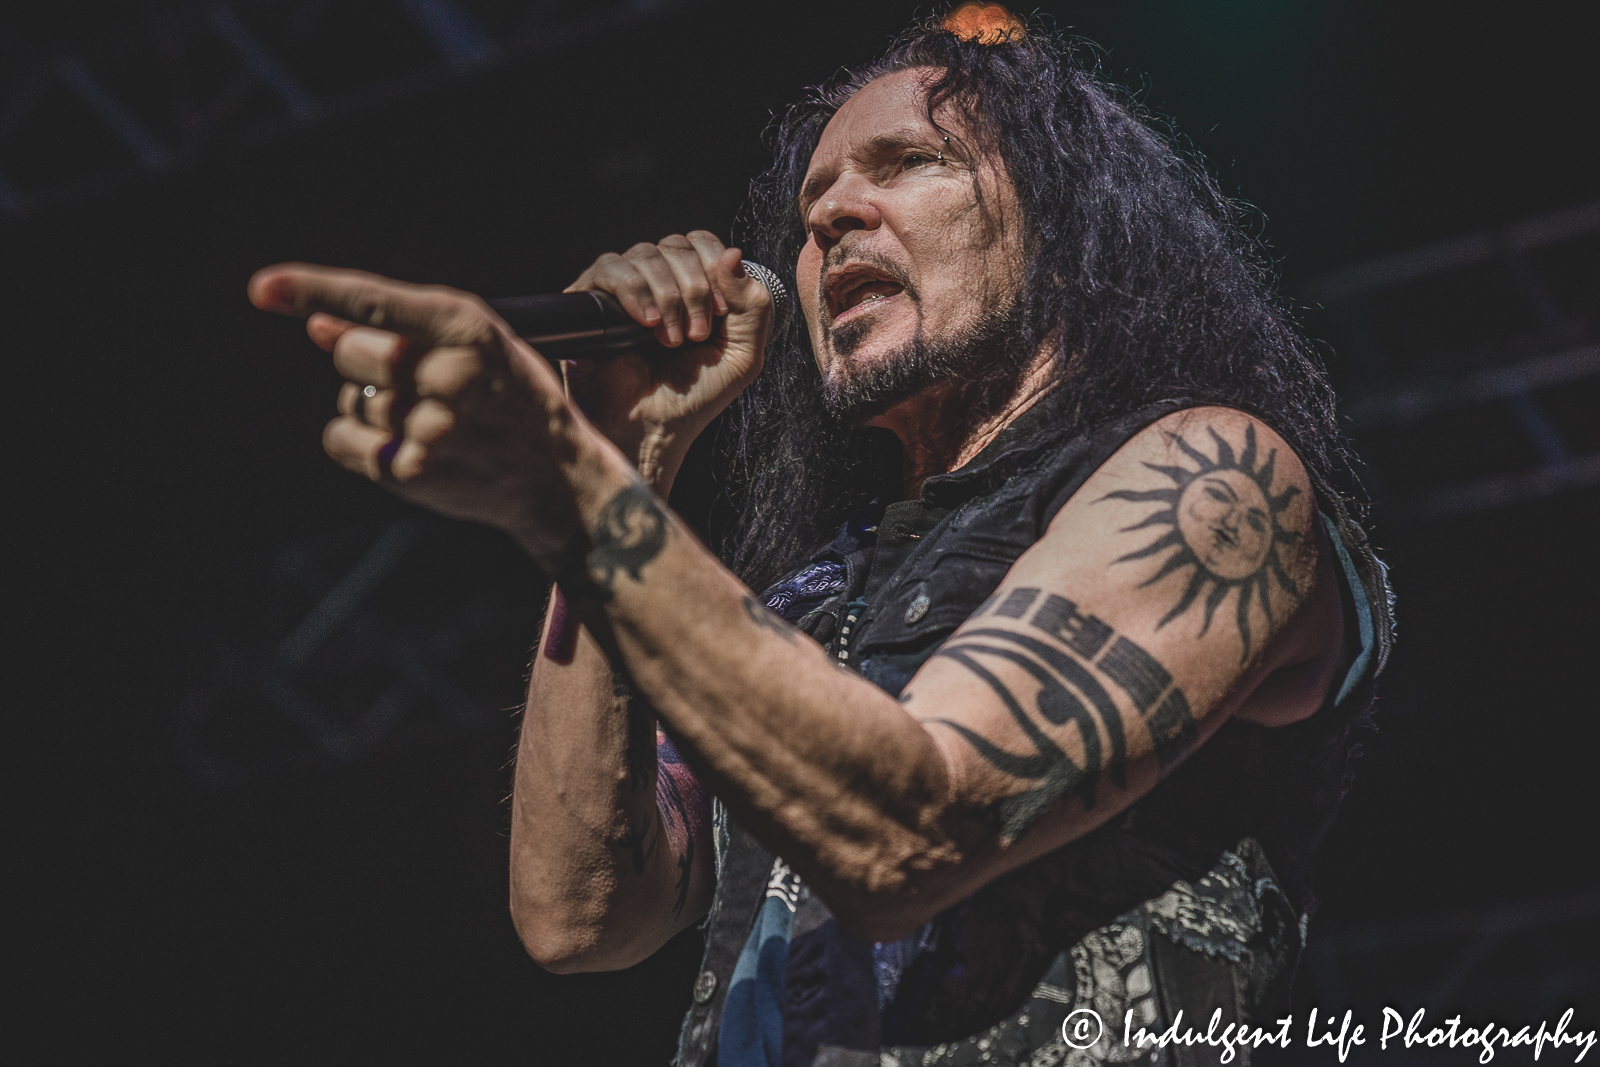 Frontman Jizzy Pearl of Quiet Riot singing "Run for Cover" at Star Pavilion inside of Ameristar Casino in Kansas City, MO on July 29, 2022.